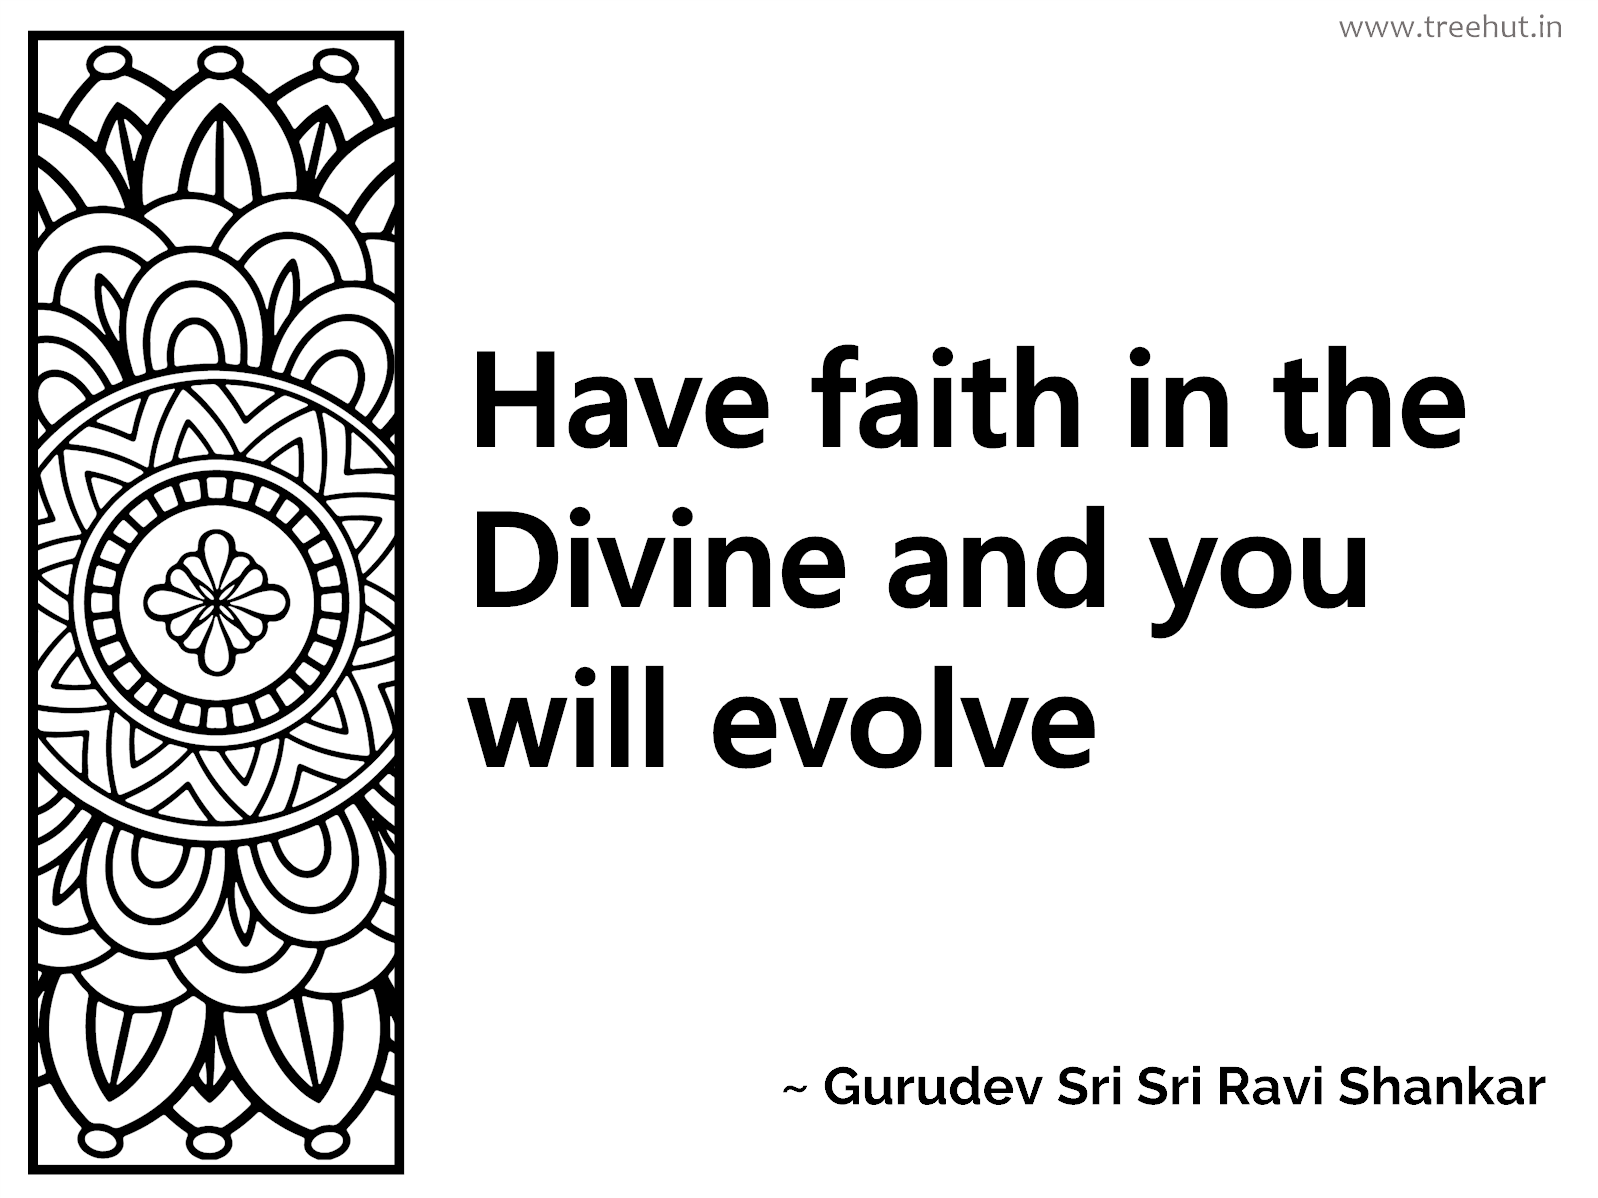 Have faith in the Divine and you will evolve Inspirational Quote by Gurudev Sri Sri Ravi Shankar, coloring pages